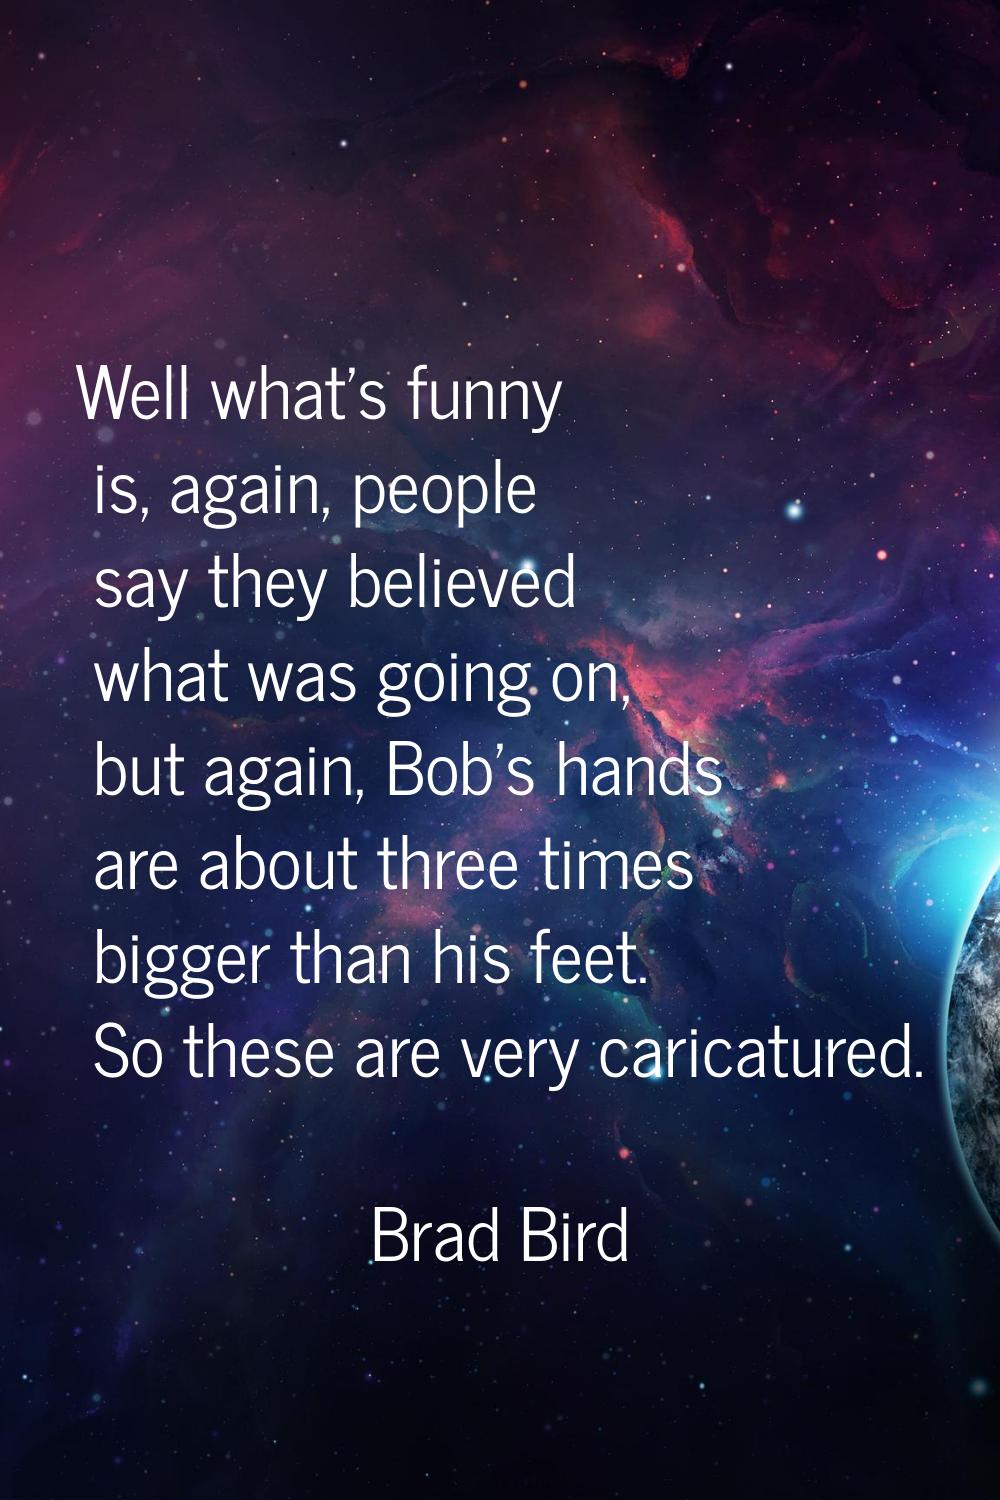 Well what's funny is, again, people say they believed what was going on, but again, Bob's hands are